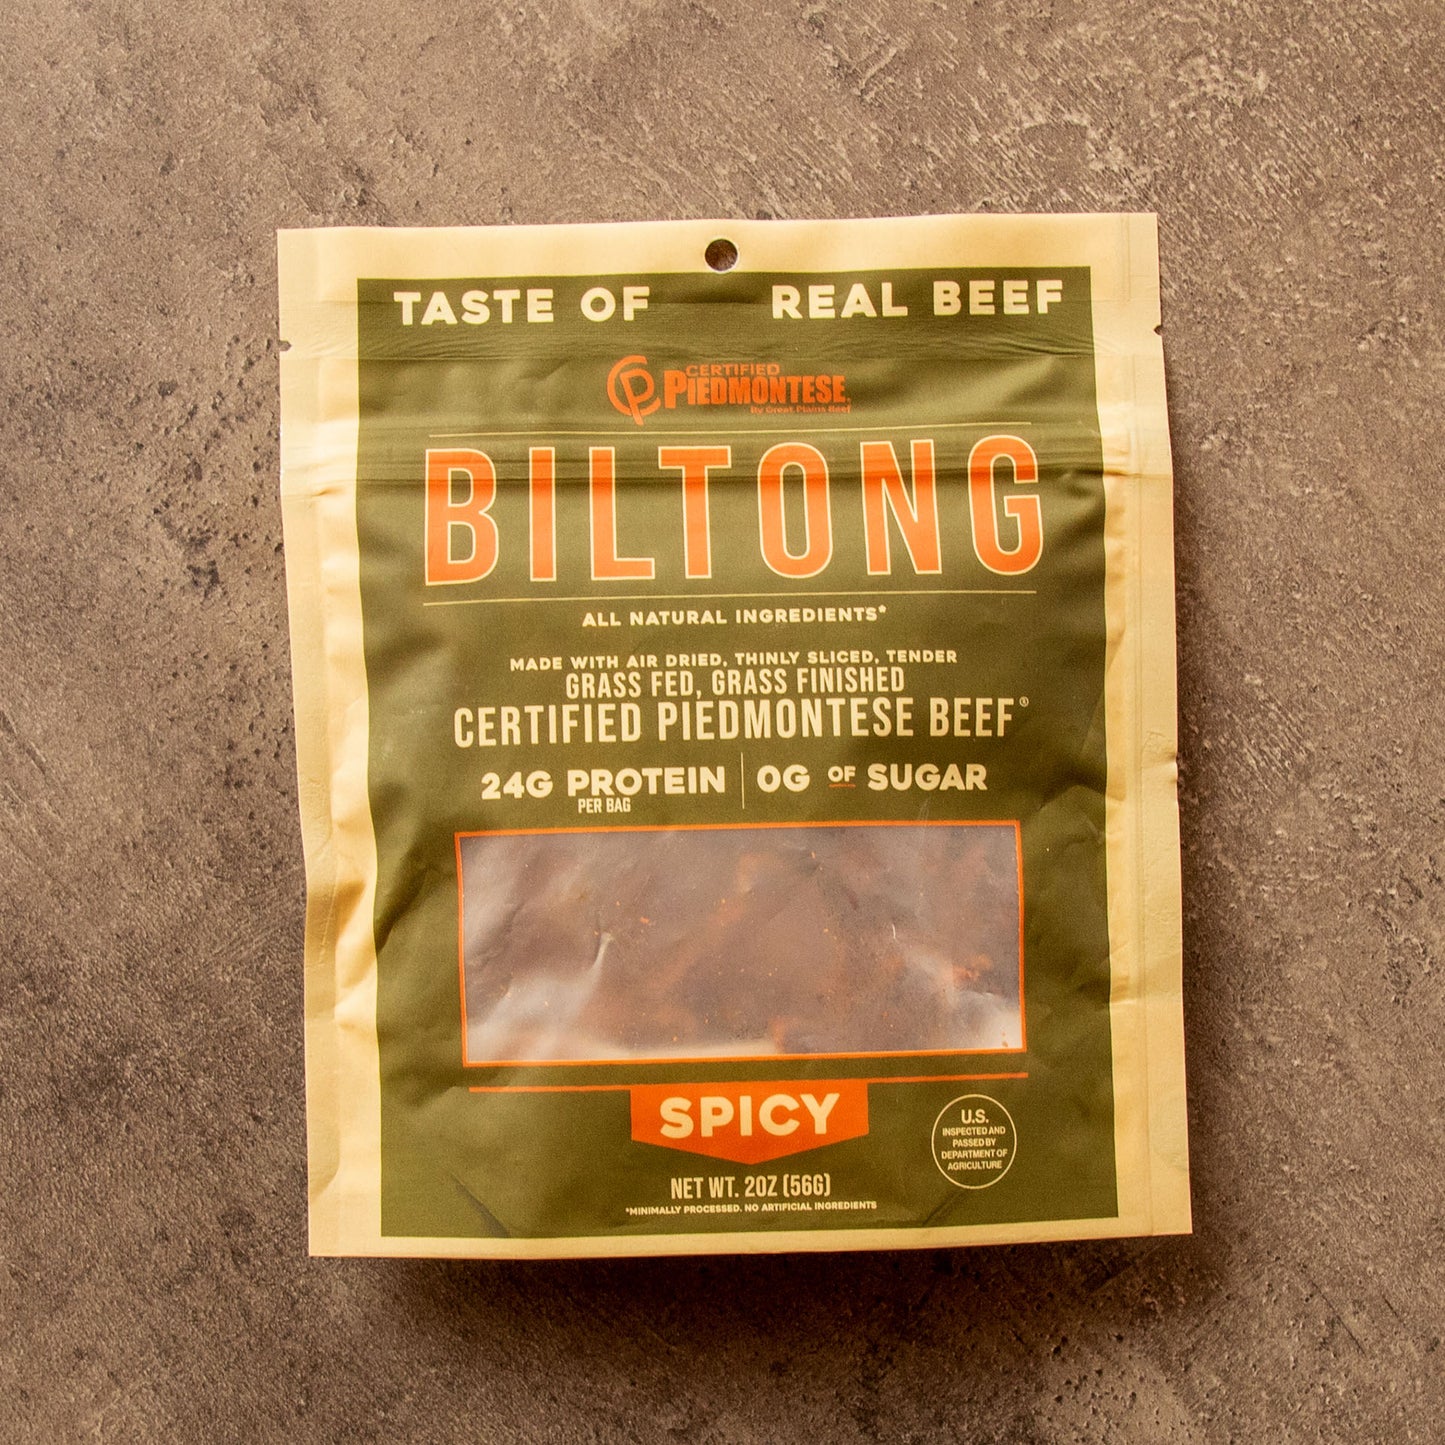 Chili Lime Sliced Beef Biltong Snack - Made by True